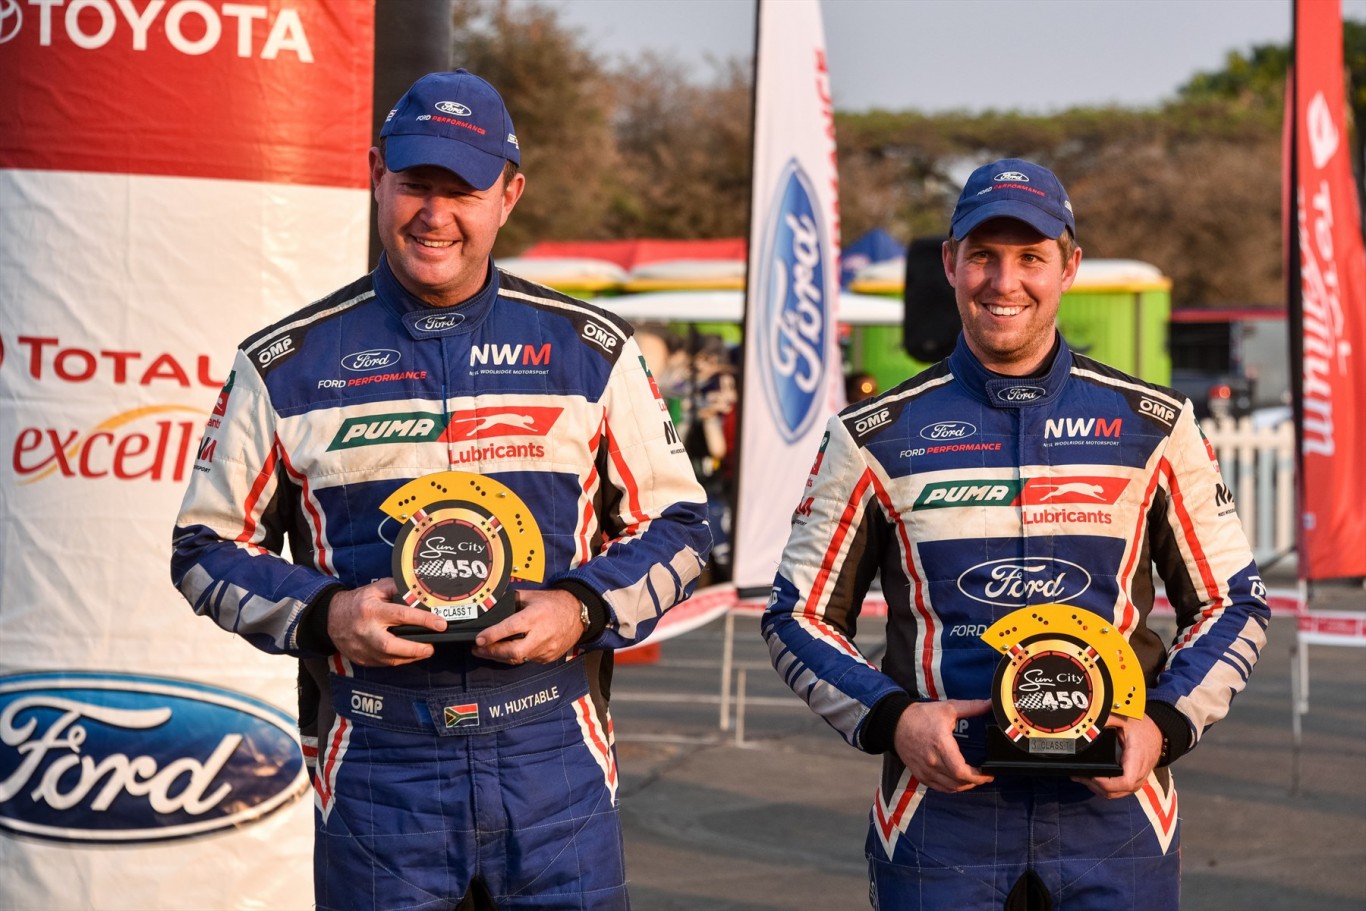 Ford NWM bags podium finish at Sun City 400